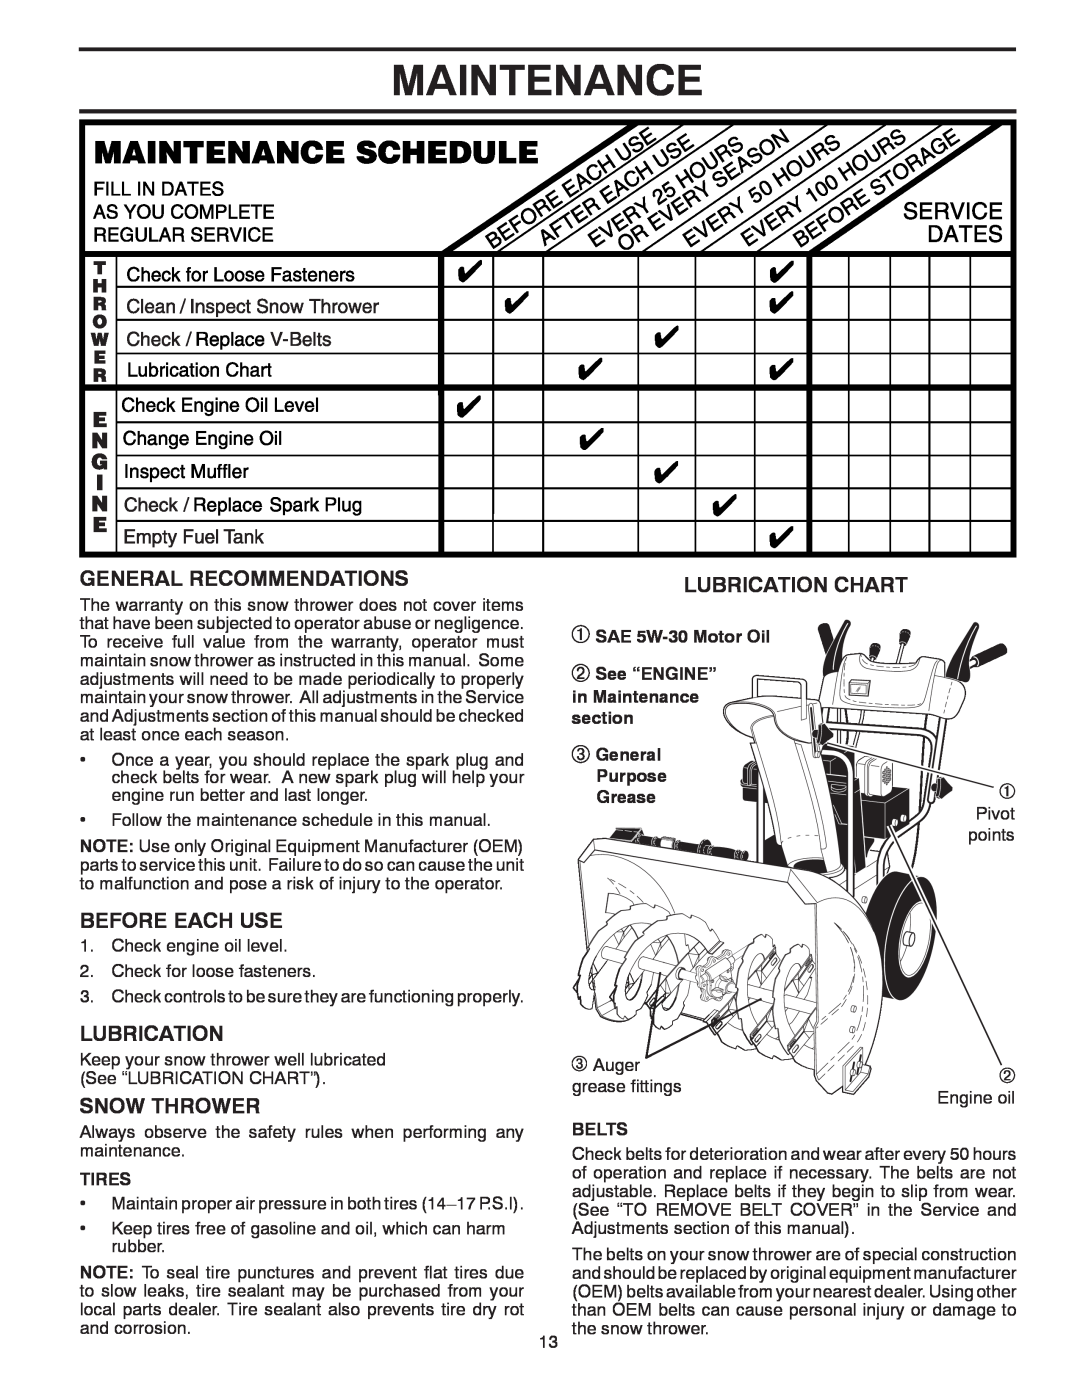 Poulan 96192002901 Maintenance, General Recommendations, Before Each Use, Snow Thrower, Lubrication Chart, Belts 